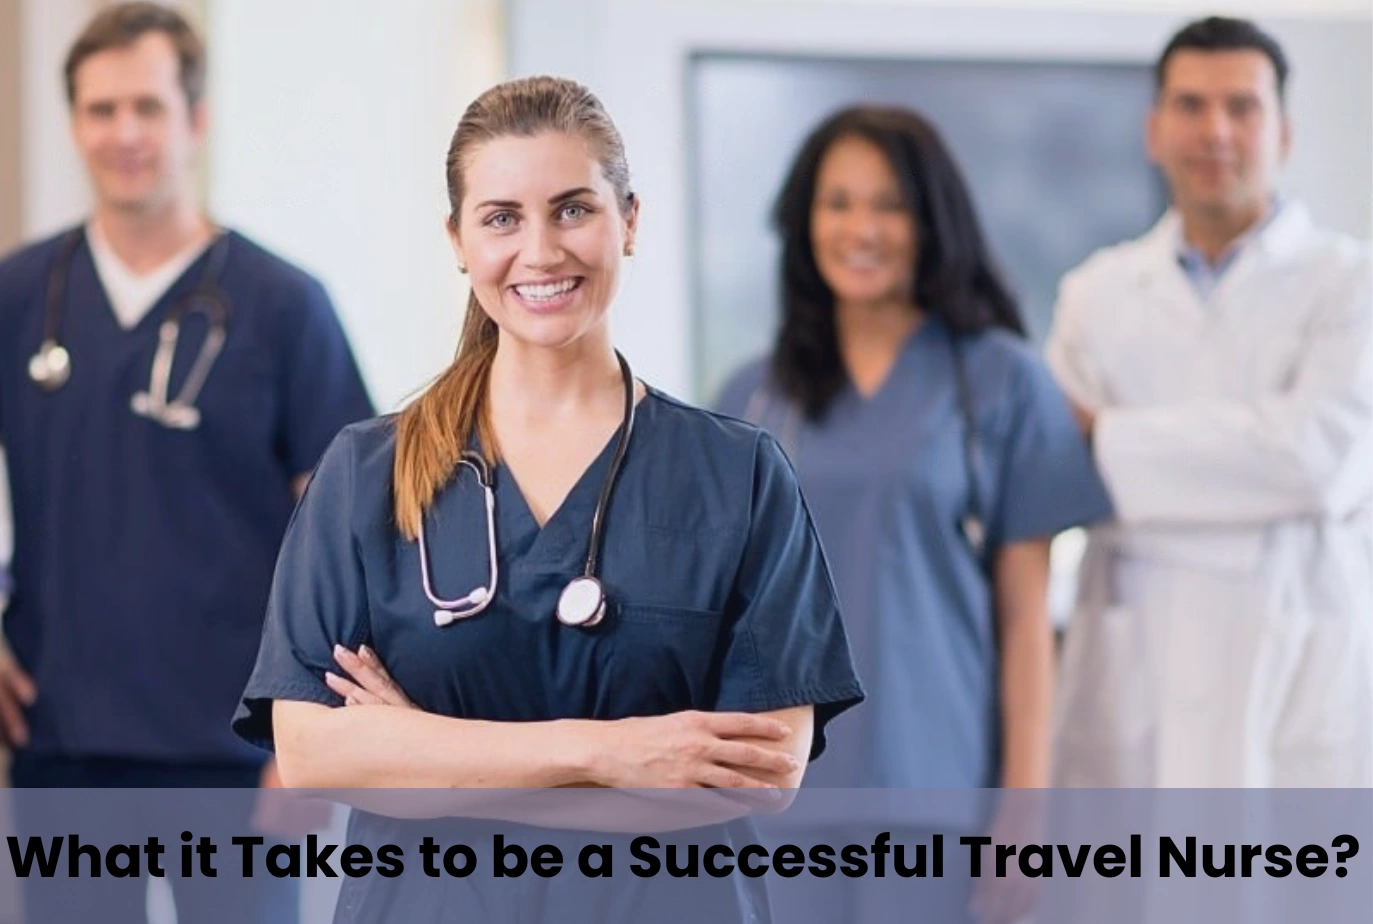 Top 10 Travel Nurse Skills to Be Successful